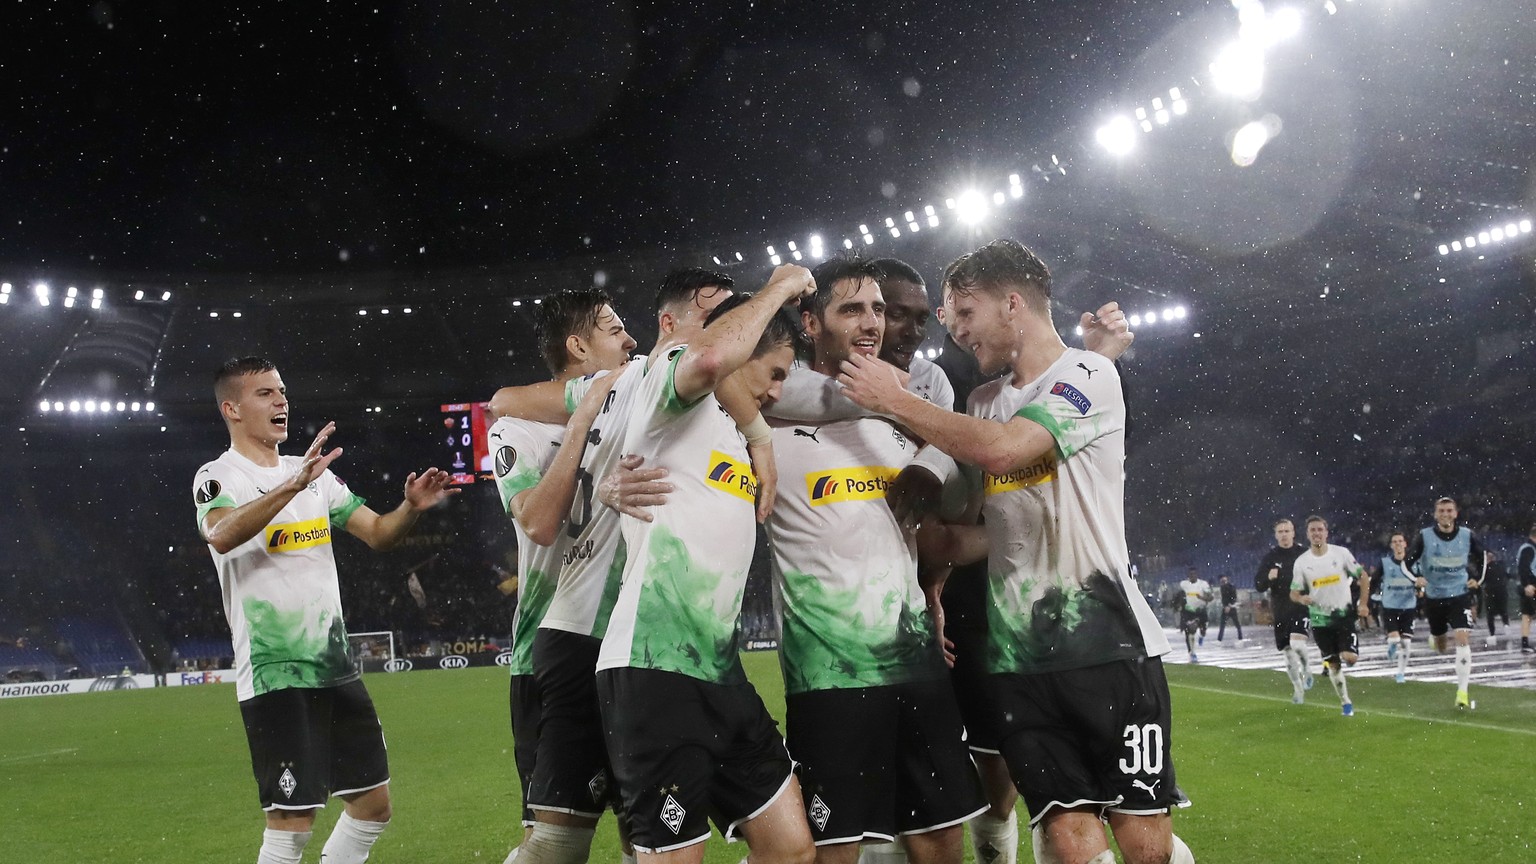 Moenchengladbach&#039;s Lars Stindl, third from right, celebrates with his teammates after scoring his side&#039;s opening goal during the Europa League group J soccer match between Roma and Borussia  ...